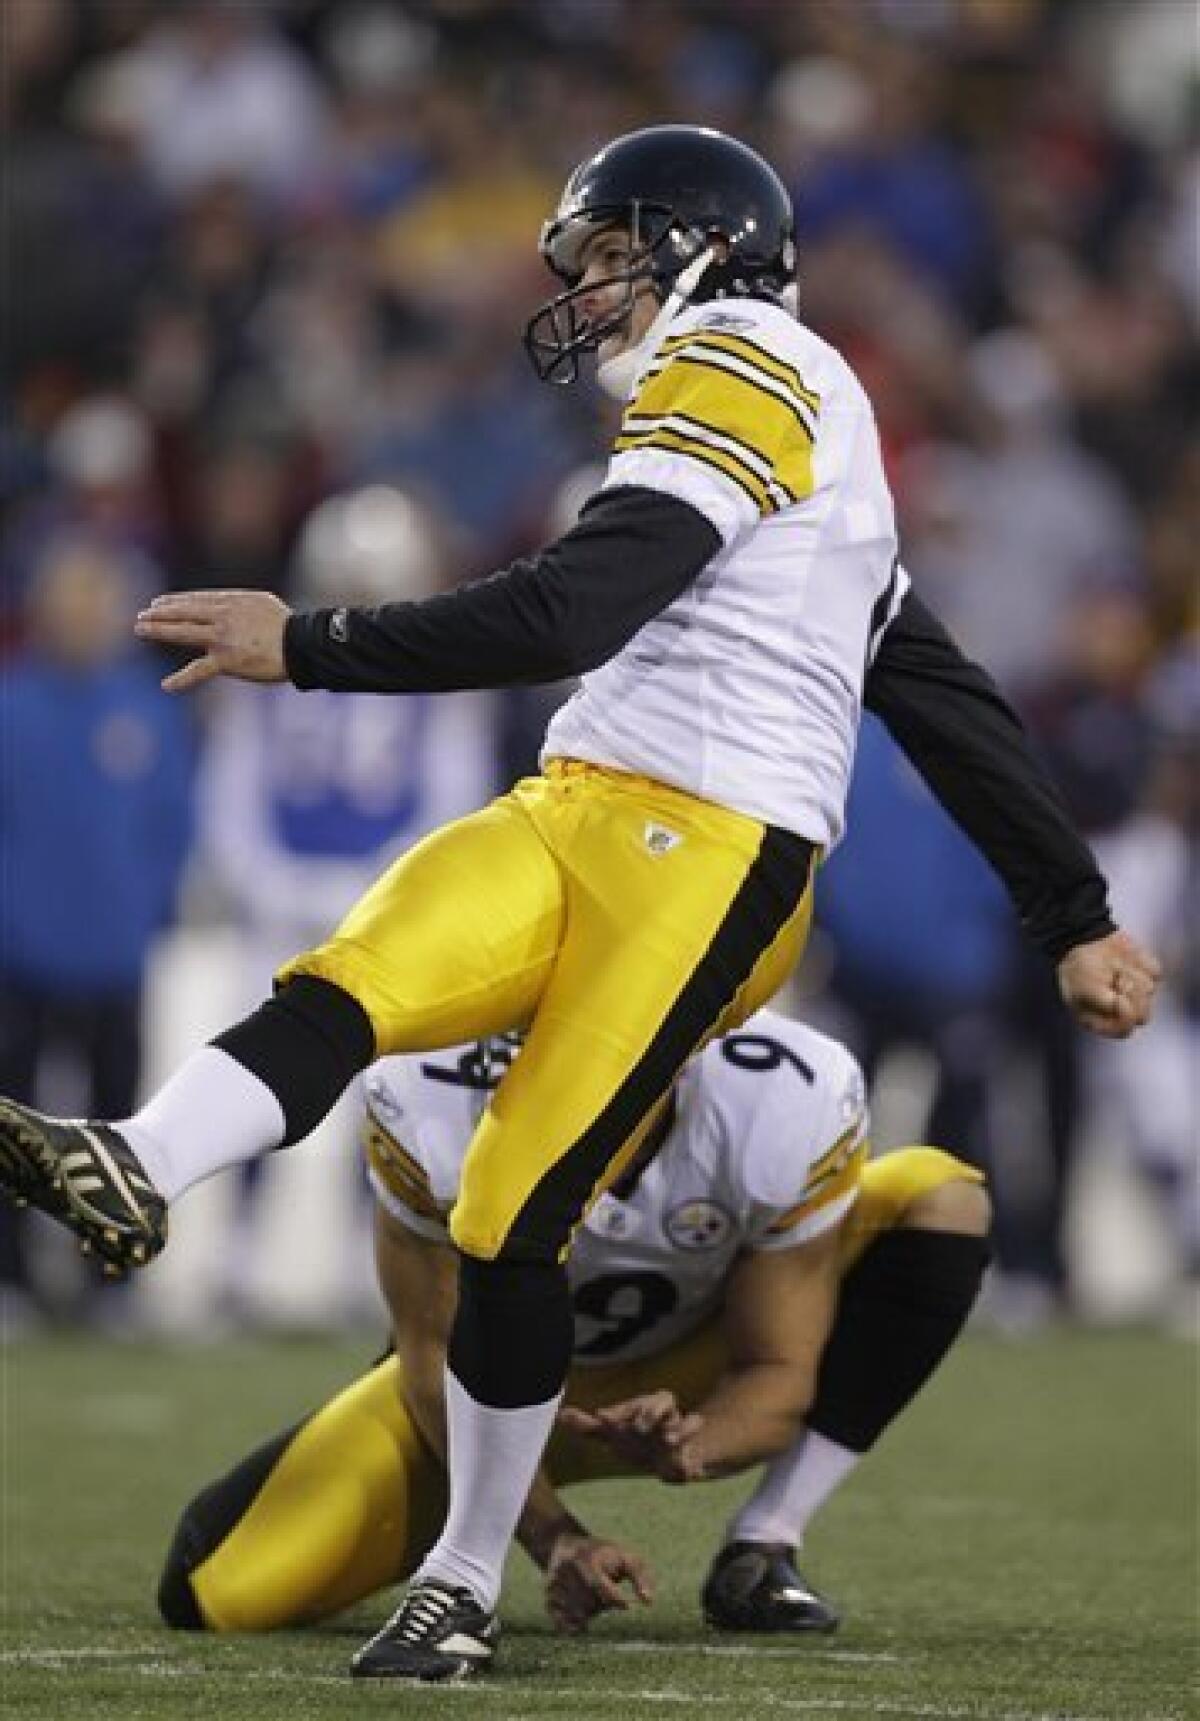 Steelers pull out 19-16 OT win over Bills - The San Diego Union